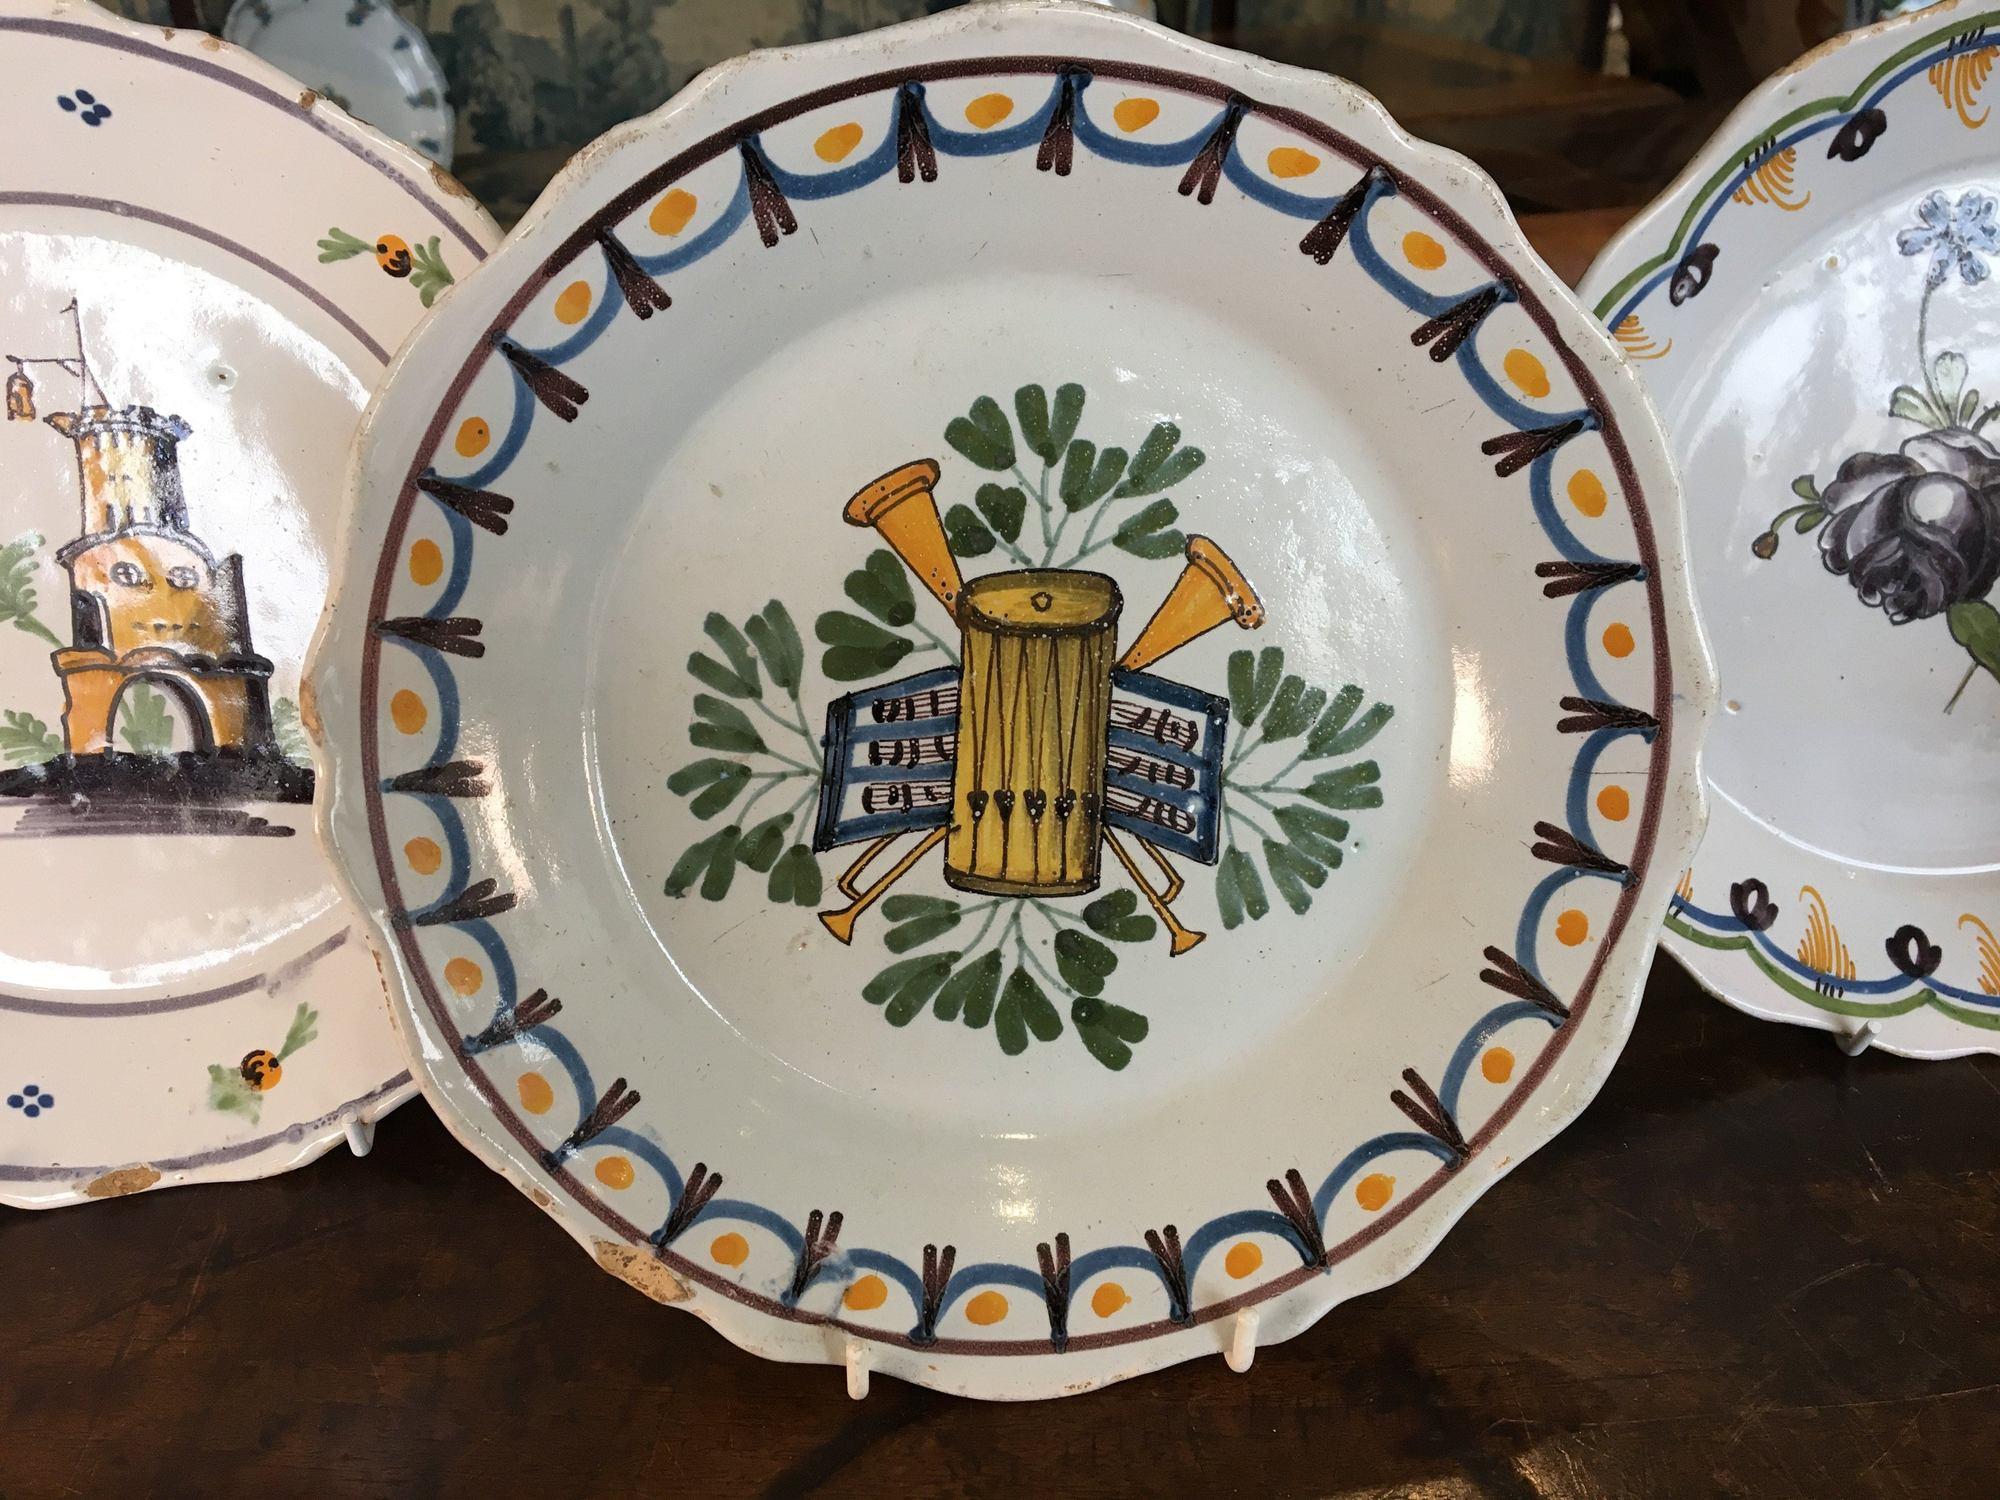 Set of four rare Nevers Faience plates in excellent condition.